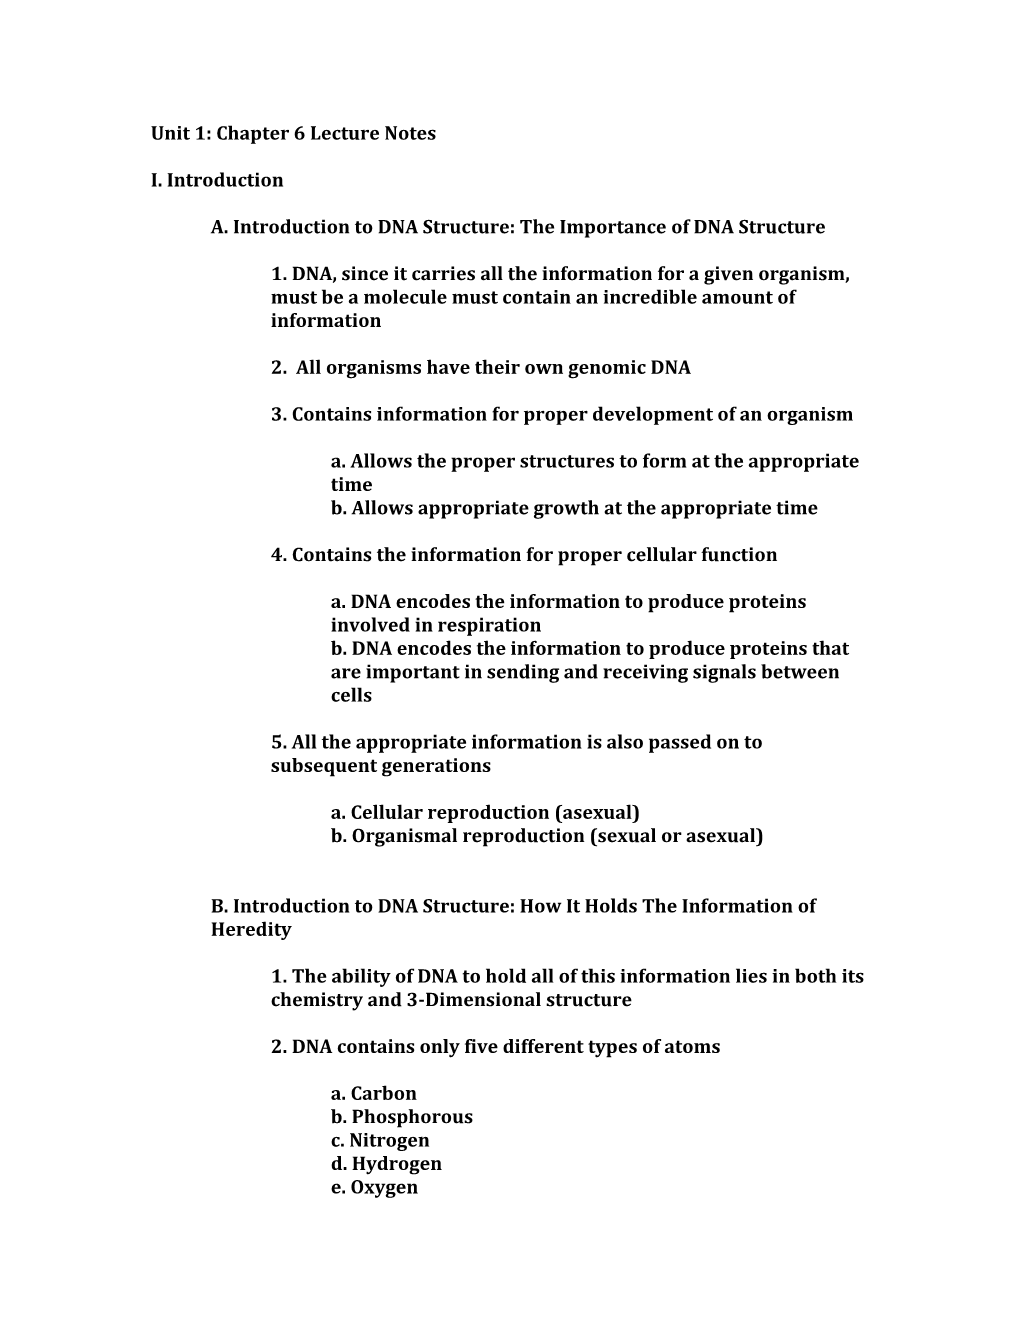 Unit 1: Chapter 6 Lecture Notes